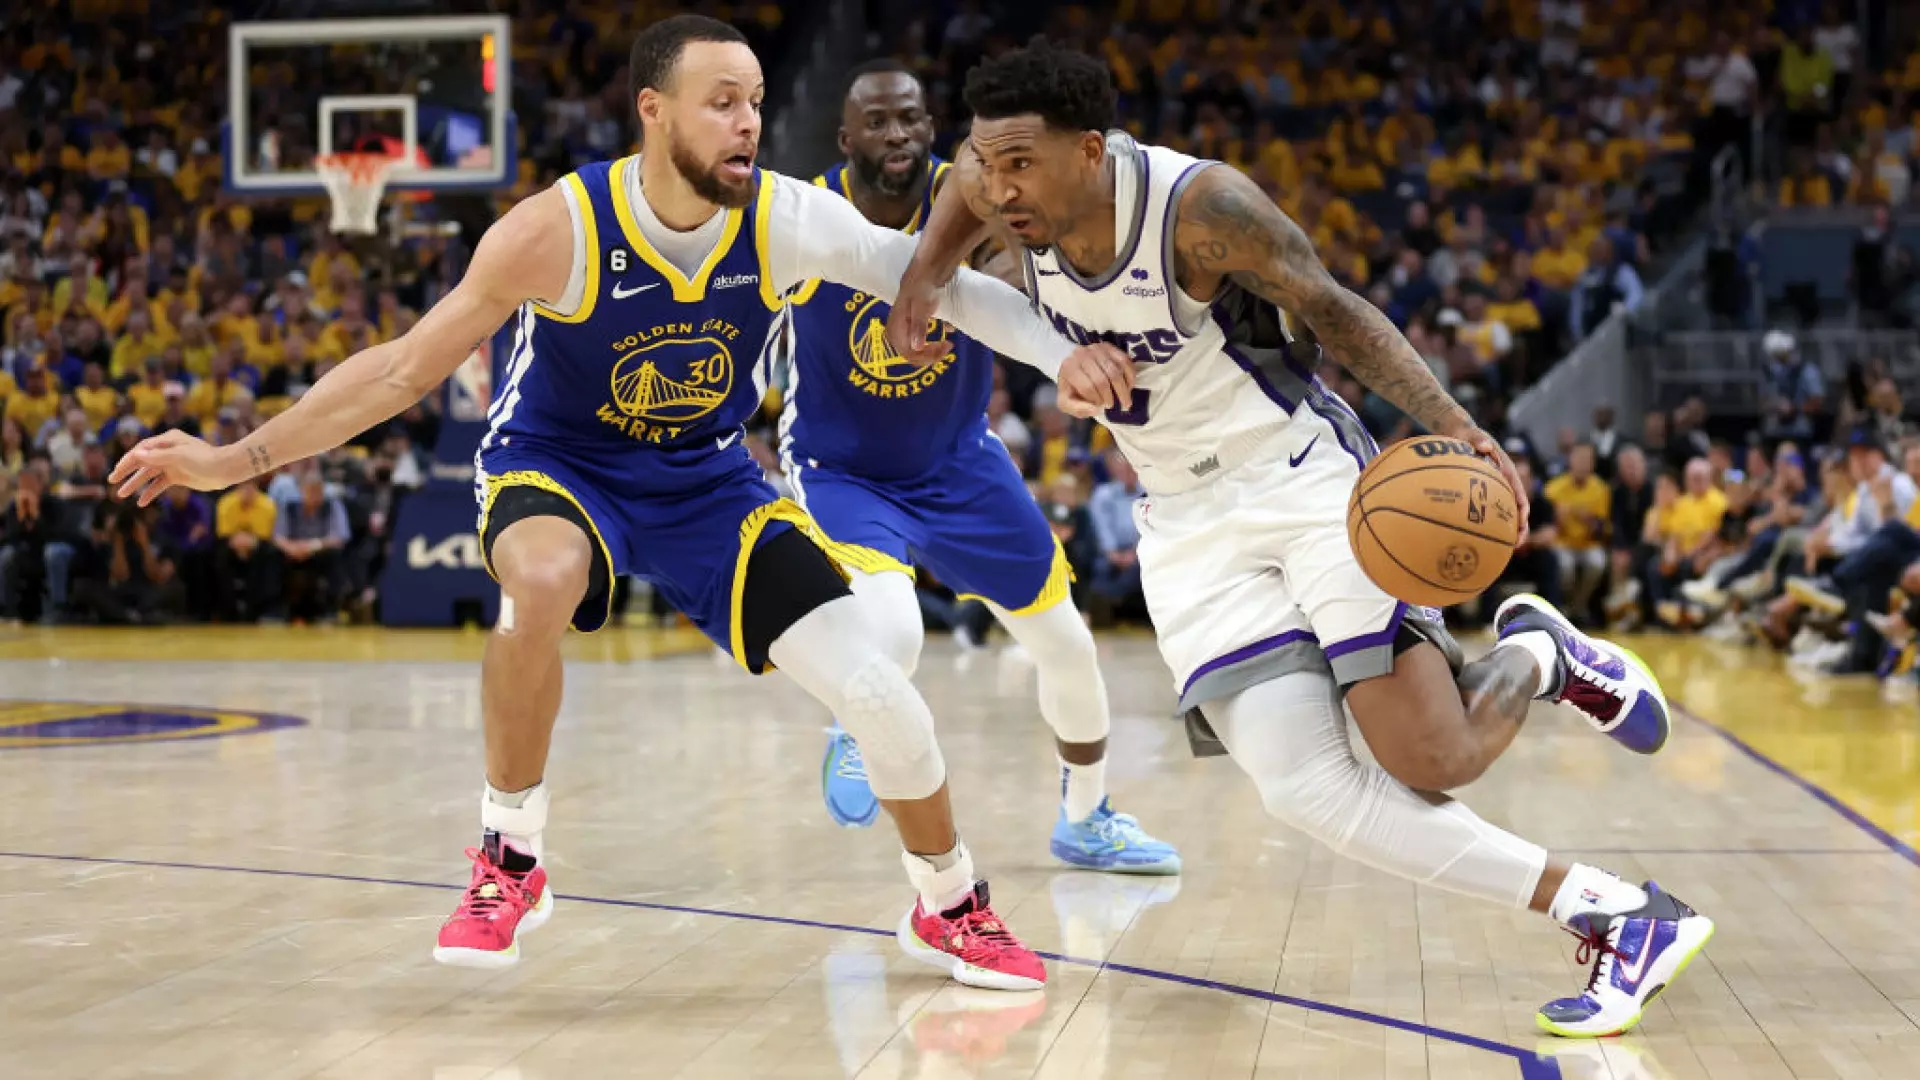 Play-off NBA: Golden State fallisce il match point, i Lakers chiudono i conti